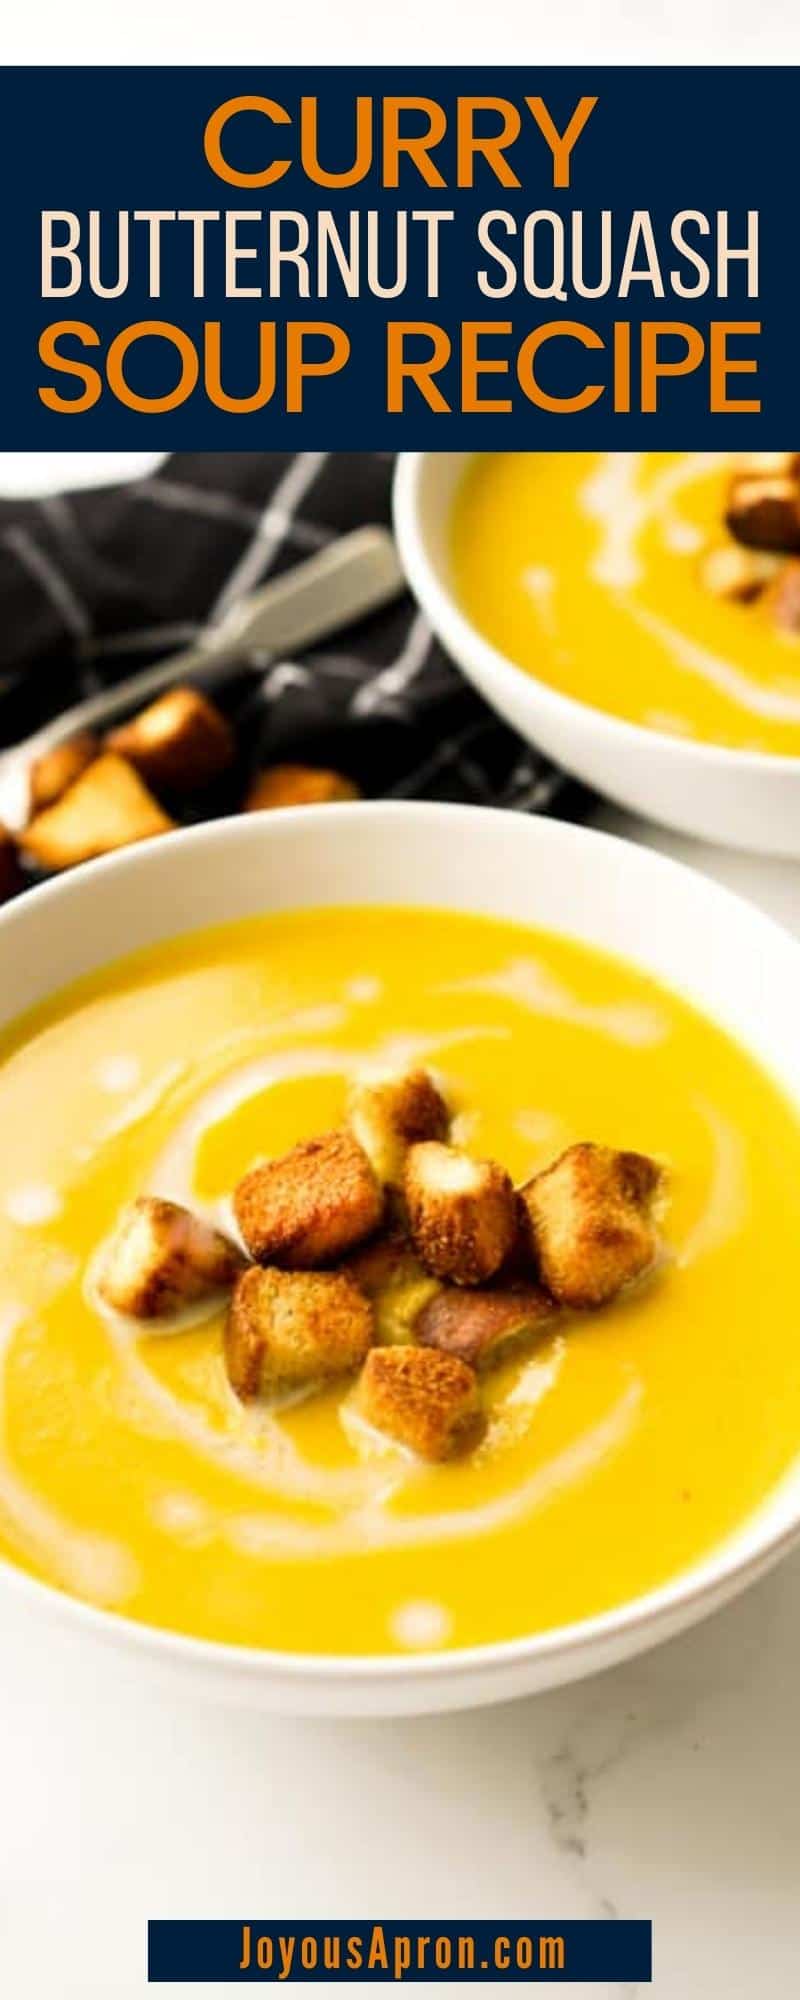 Curry Butternut Squash Soup - a cozy and healthy Fall soup recipe! Thick and creamy Curry Butternut Squash Soup combines butternut squash, coconut milk, curry powder, carrots, onions, and garlic. Very flavorful and yummy. via @joyousapron